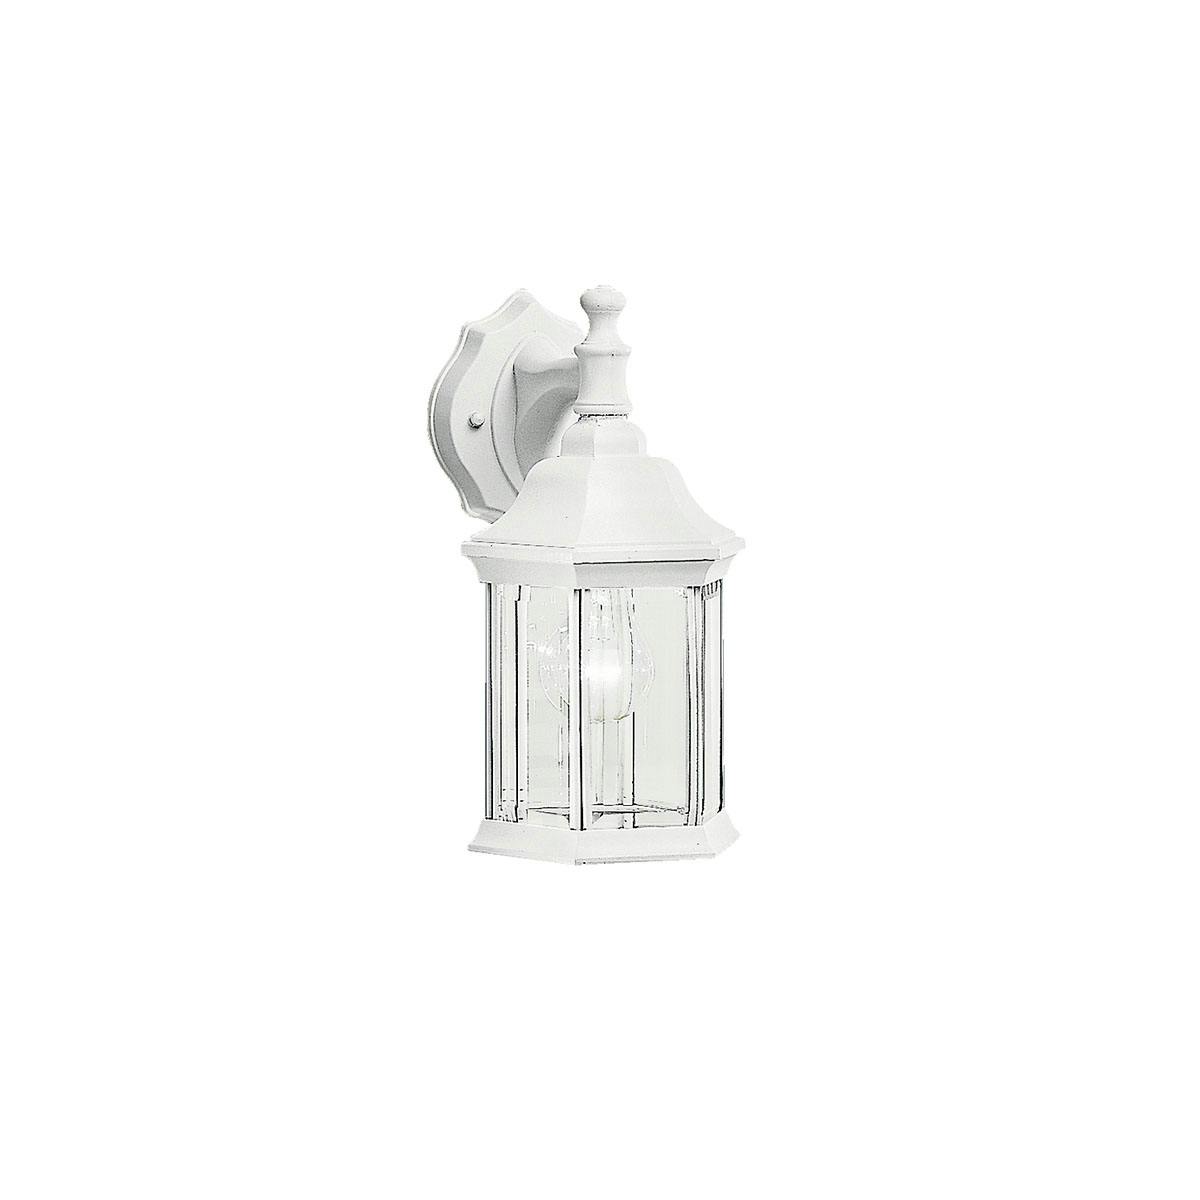 Chesapeake 11.75" Wall Light in White on a white background